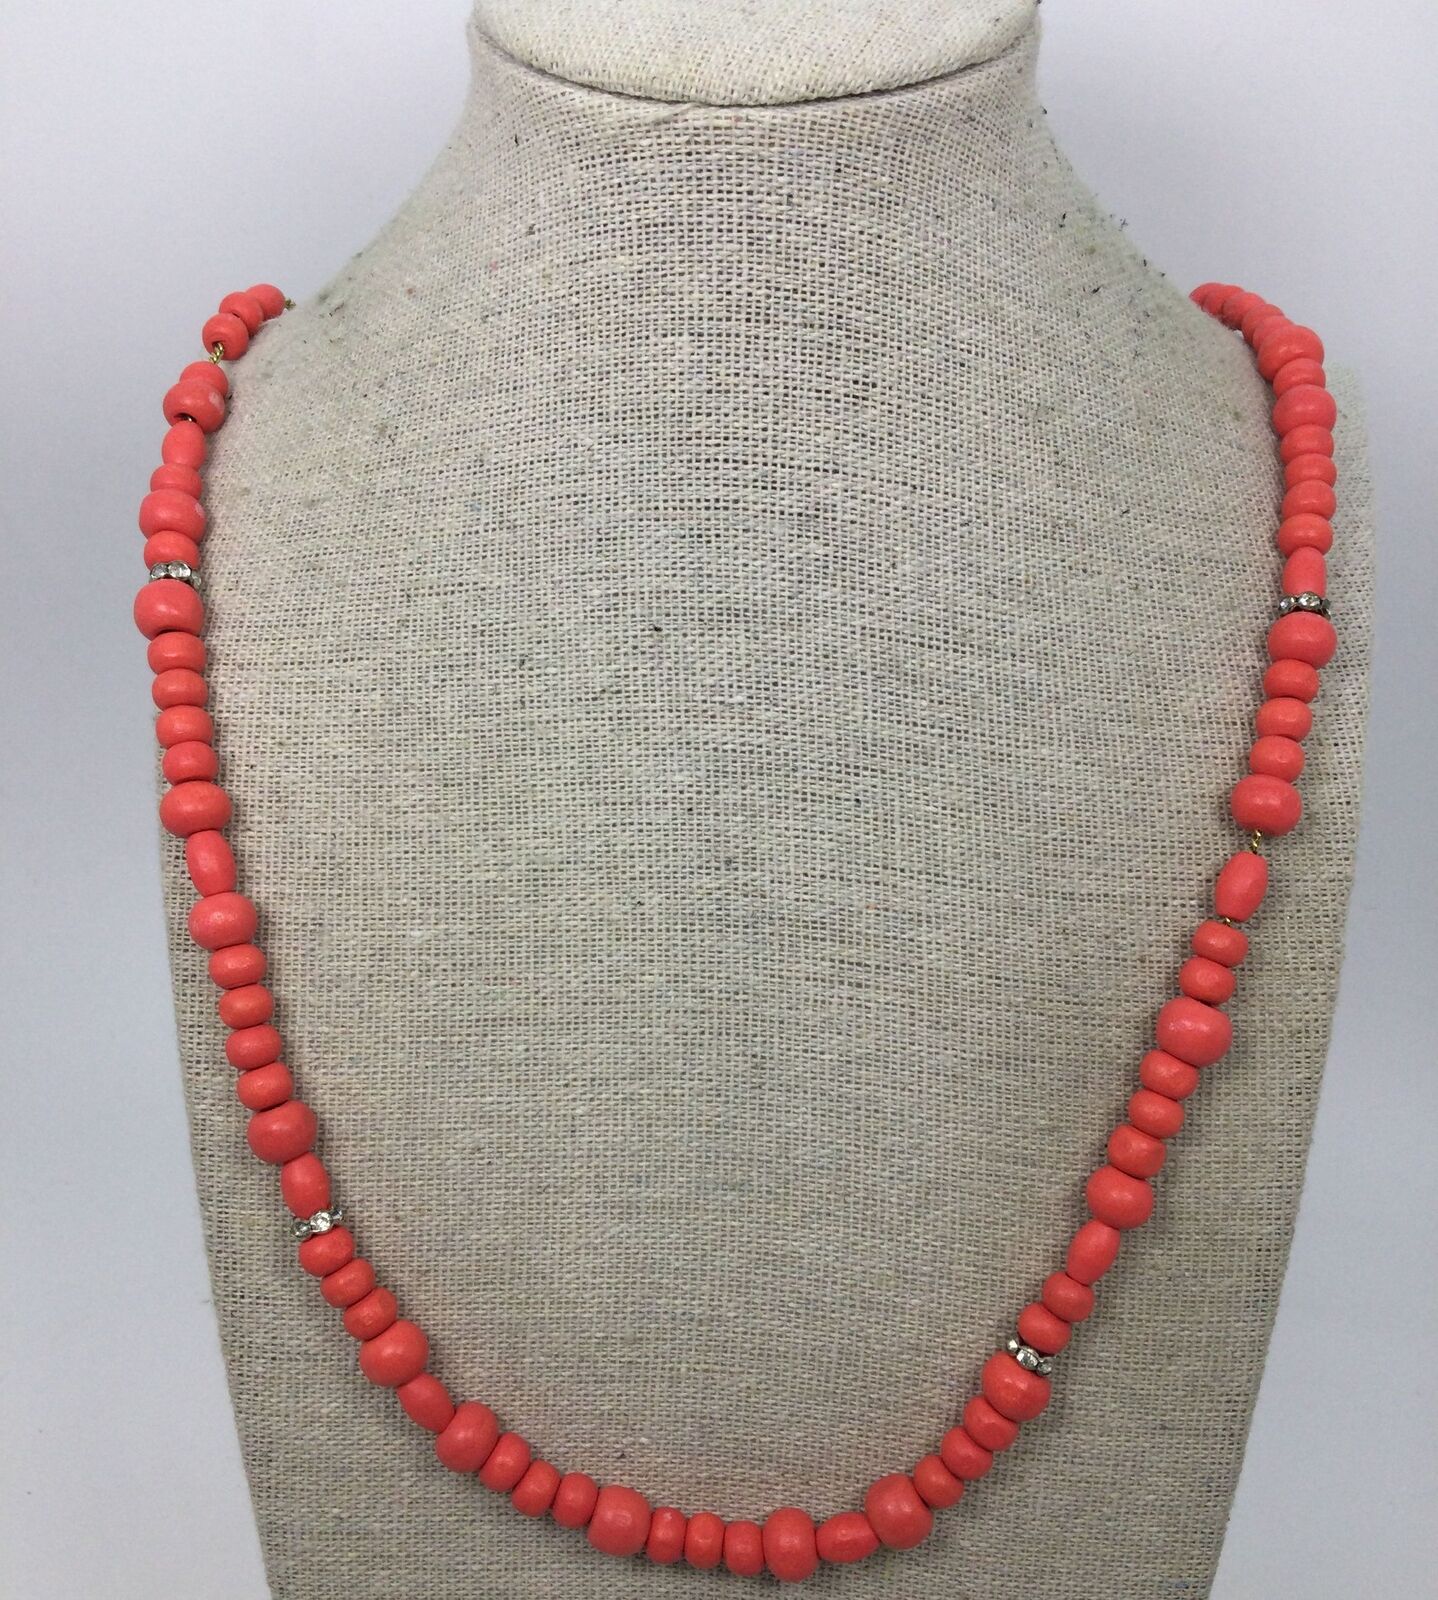 NWT J. Crew Coral Pink Beaded Necklace - image 2